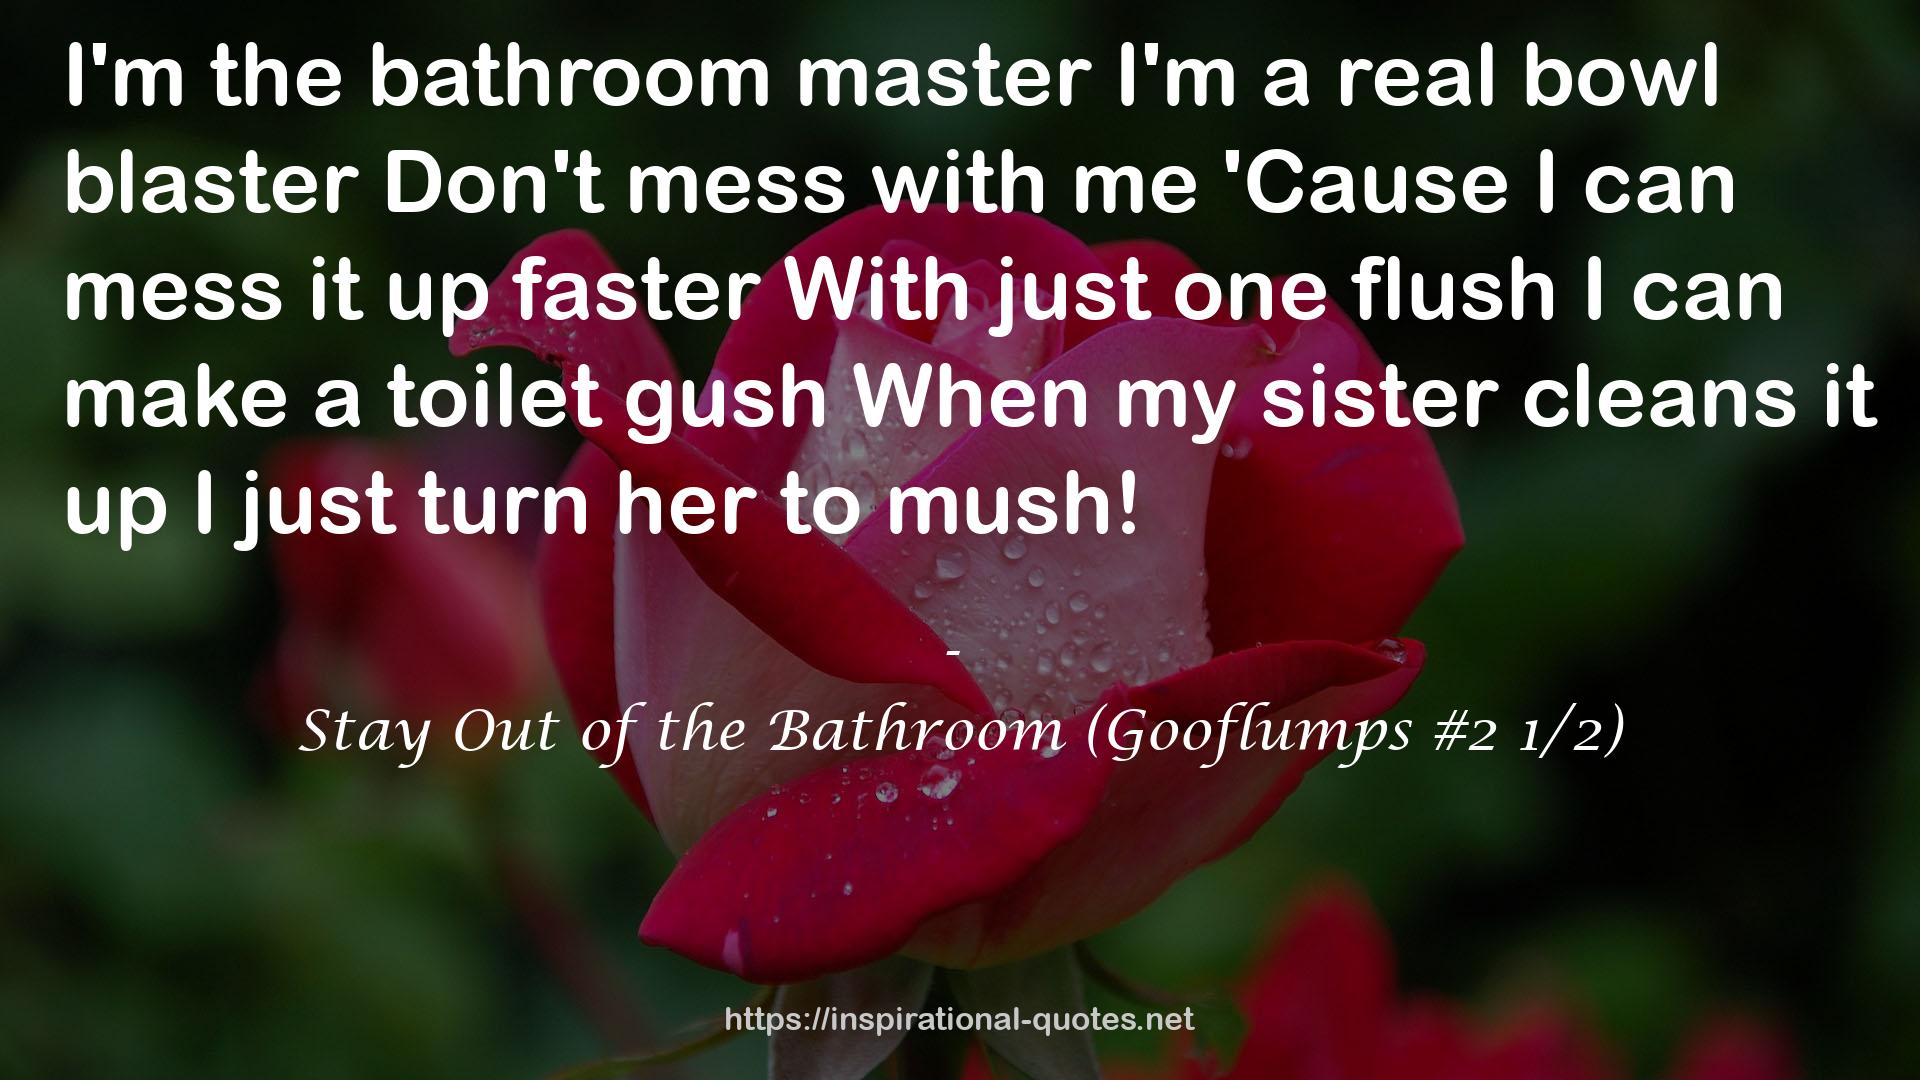 Stay Out of the Bathroom (Gooflumps #2 1/2) QUOTES